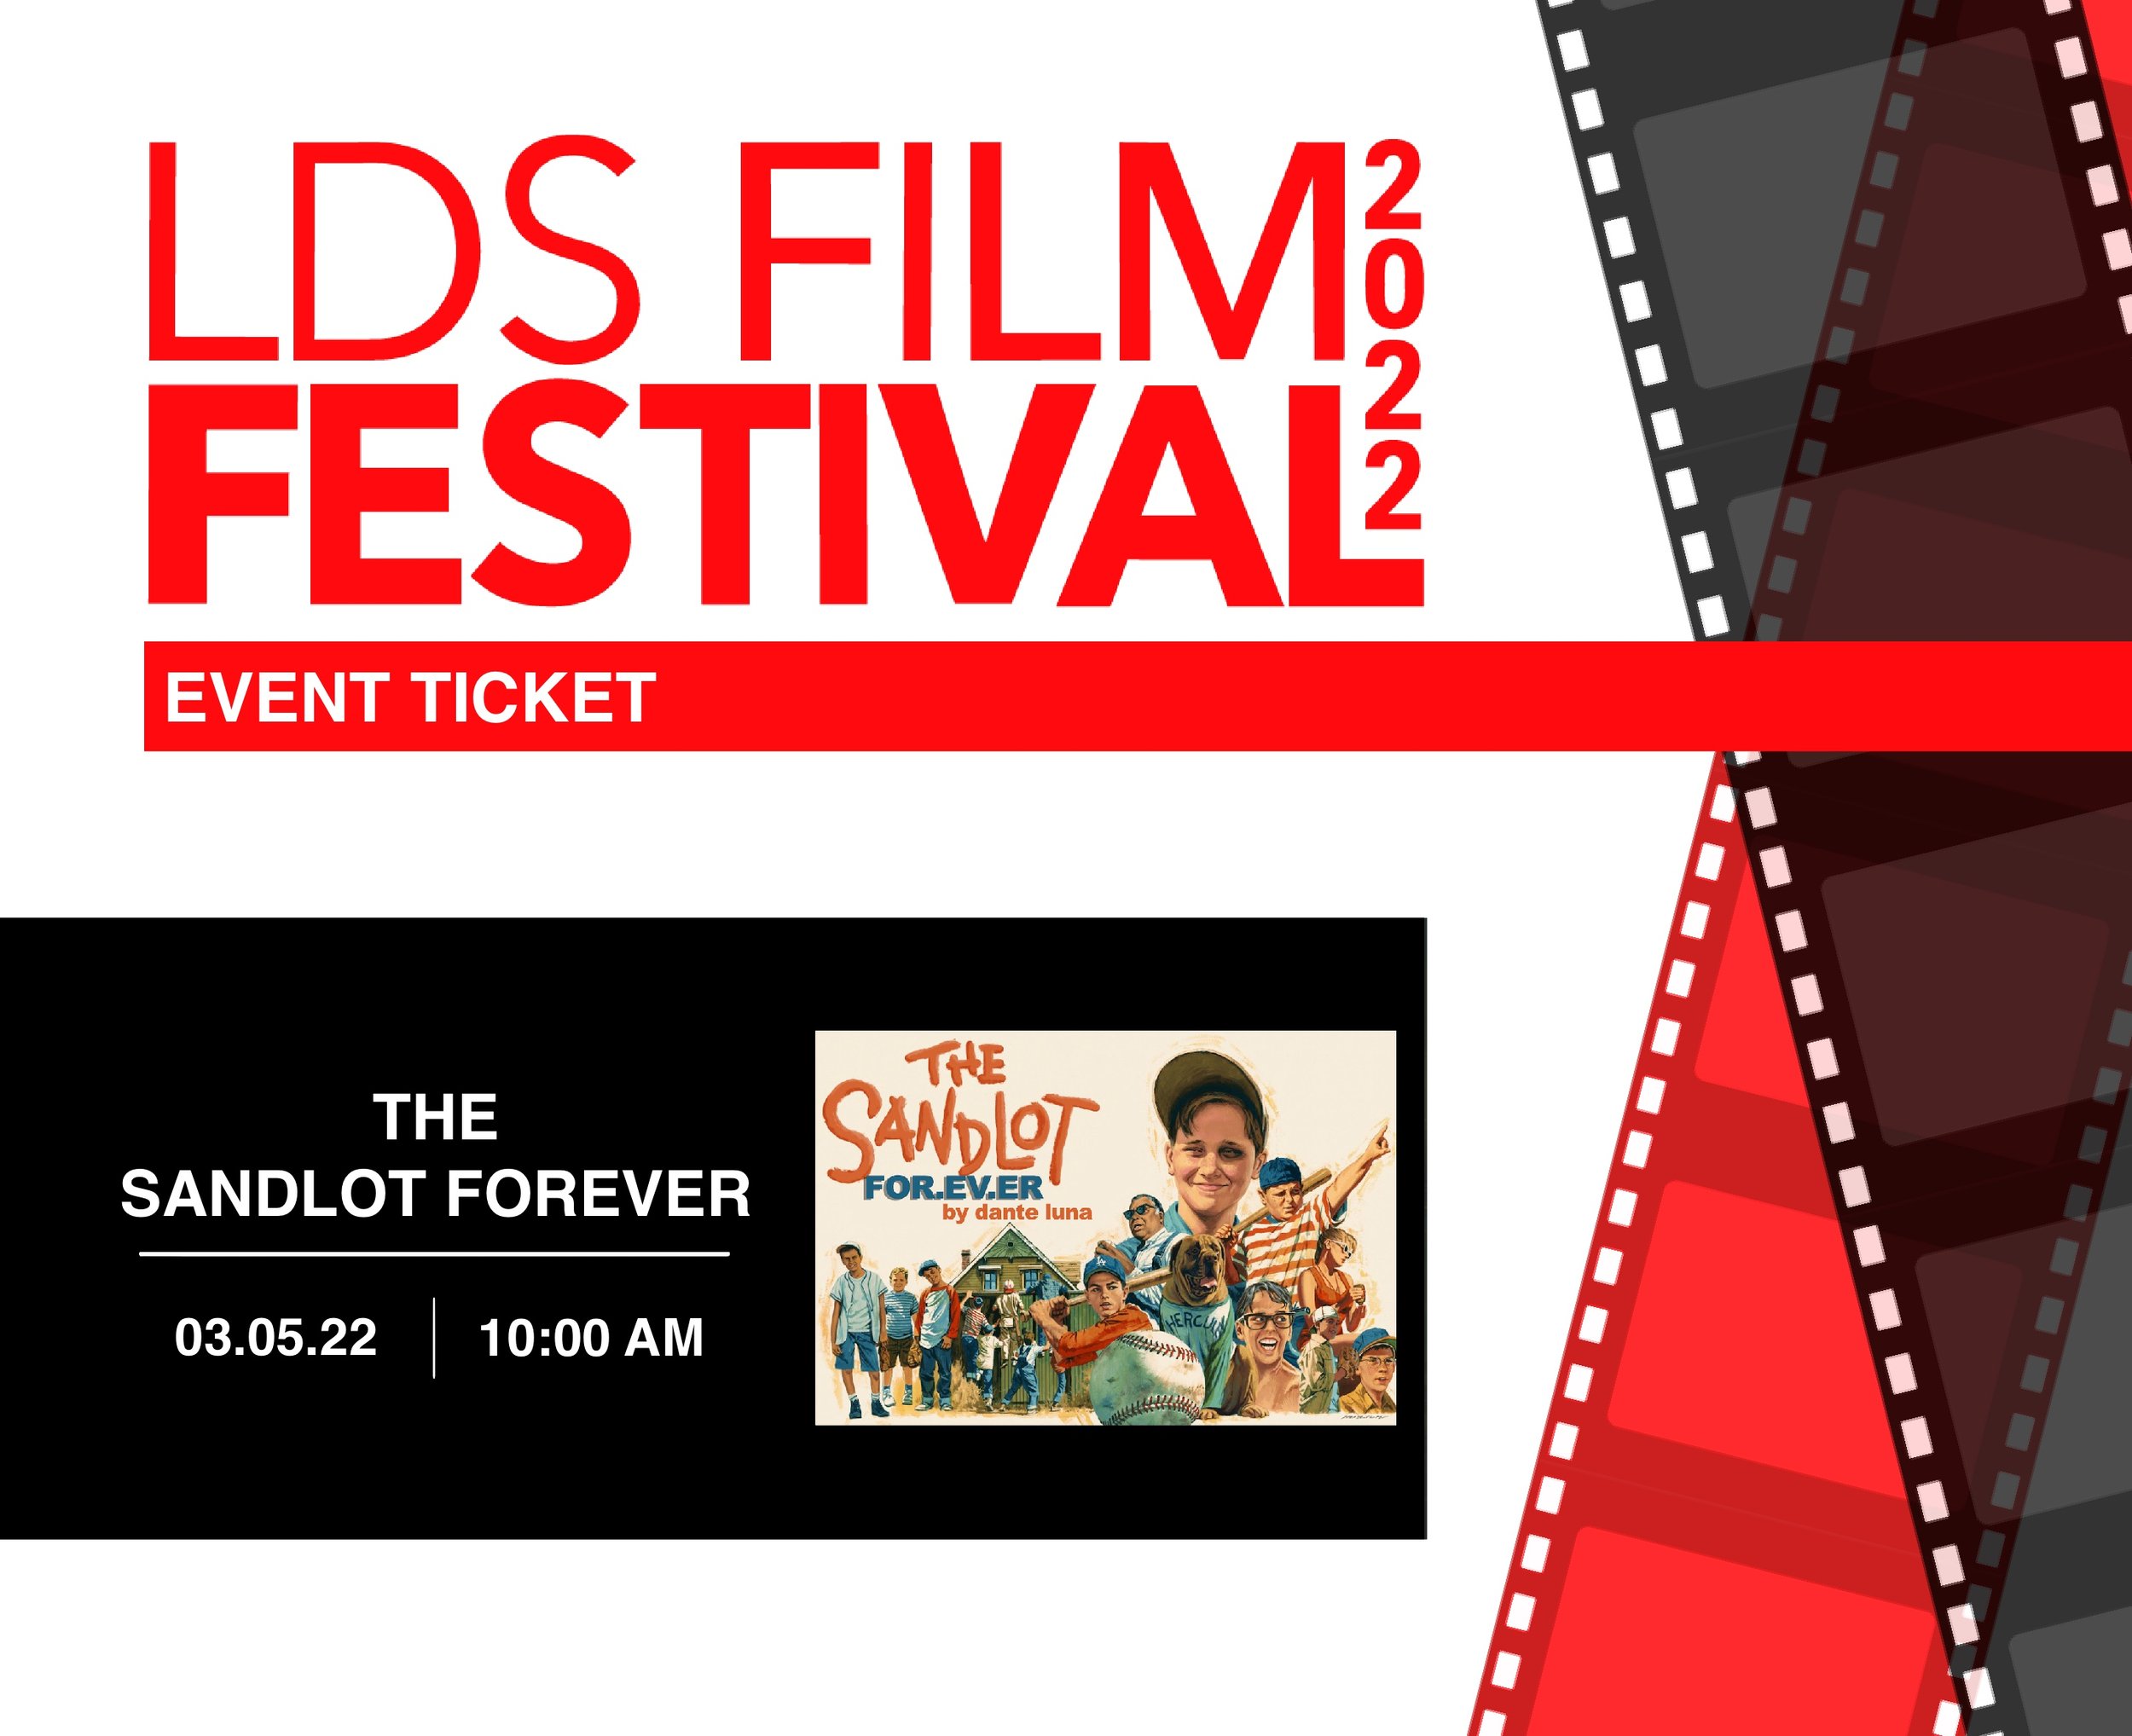 The Sandlot Forever 03.05.22 | 10:00 AM Showhouse II Theatre - The Sandlot Forever captures the high energy and excitement of the 25th Anniversary events that were held in honor of America's beloved baseball movie The Sandlot.     Q&A with filmmakers